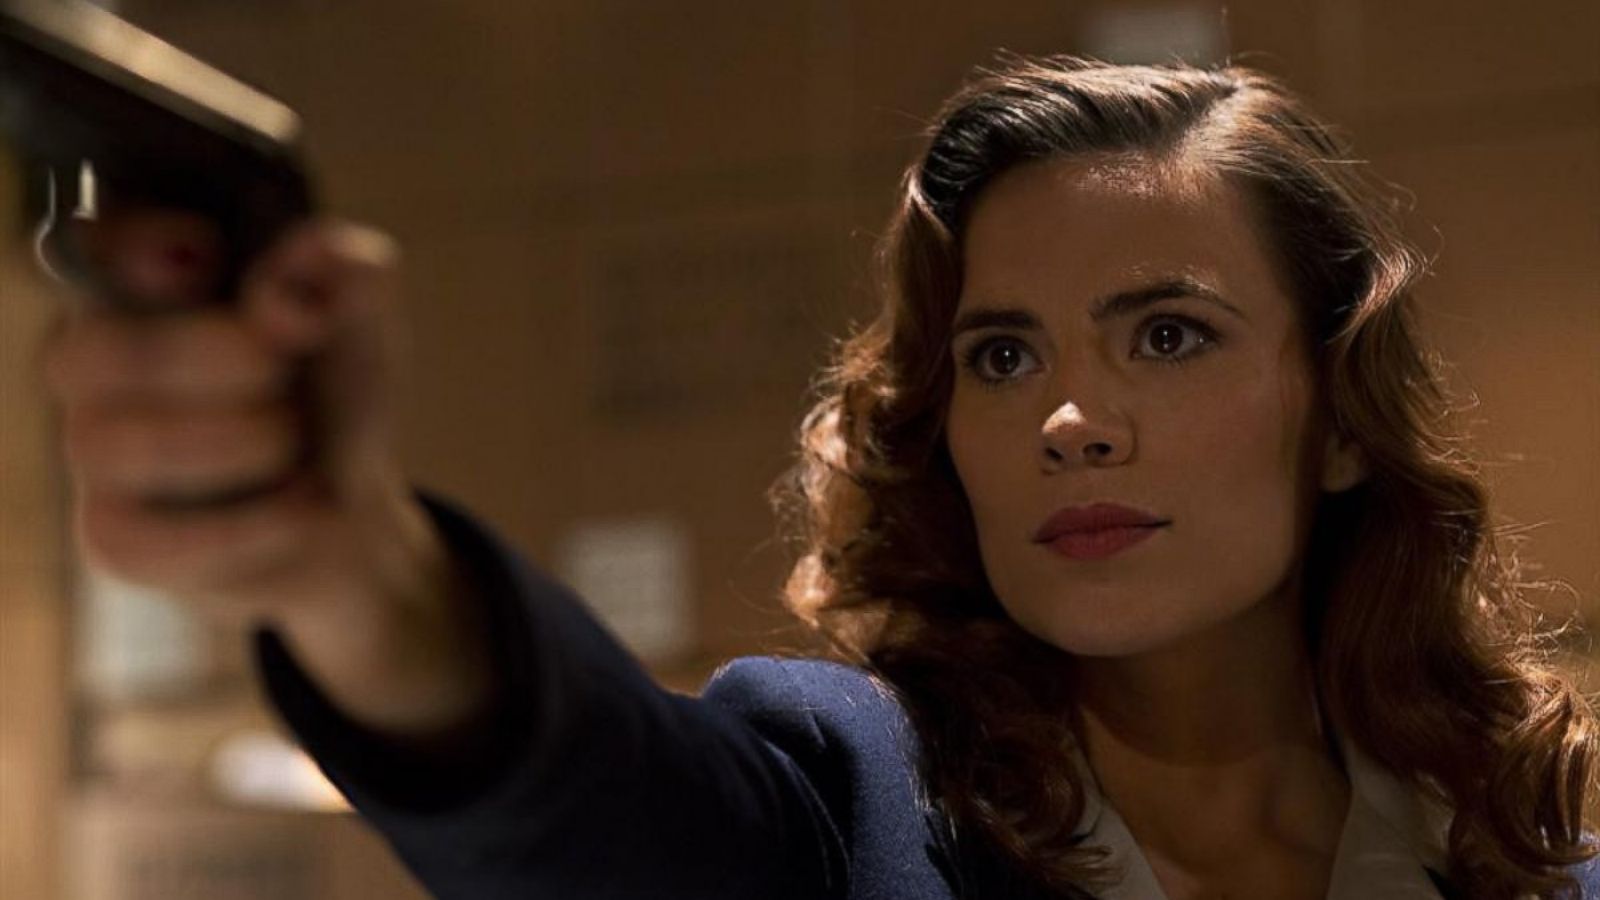 Hayley Atwell Conviction Actress Wallpapers